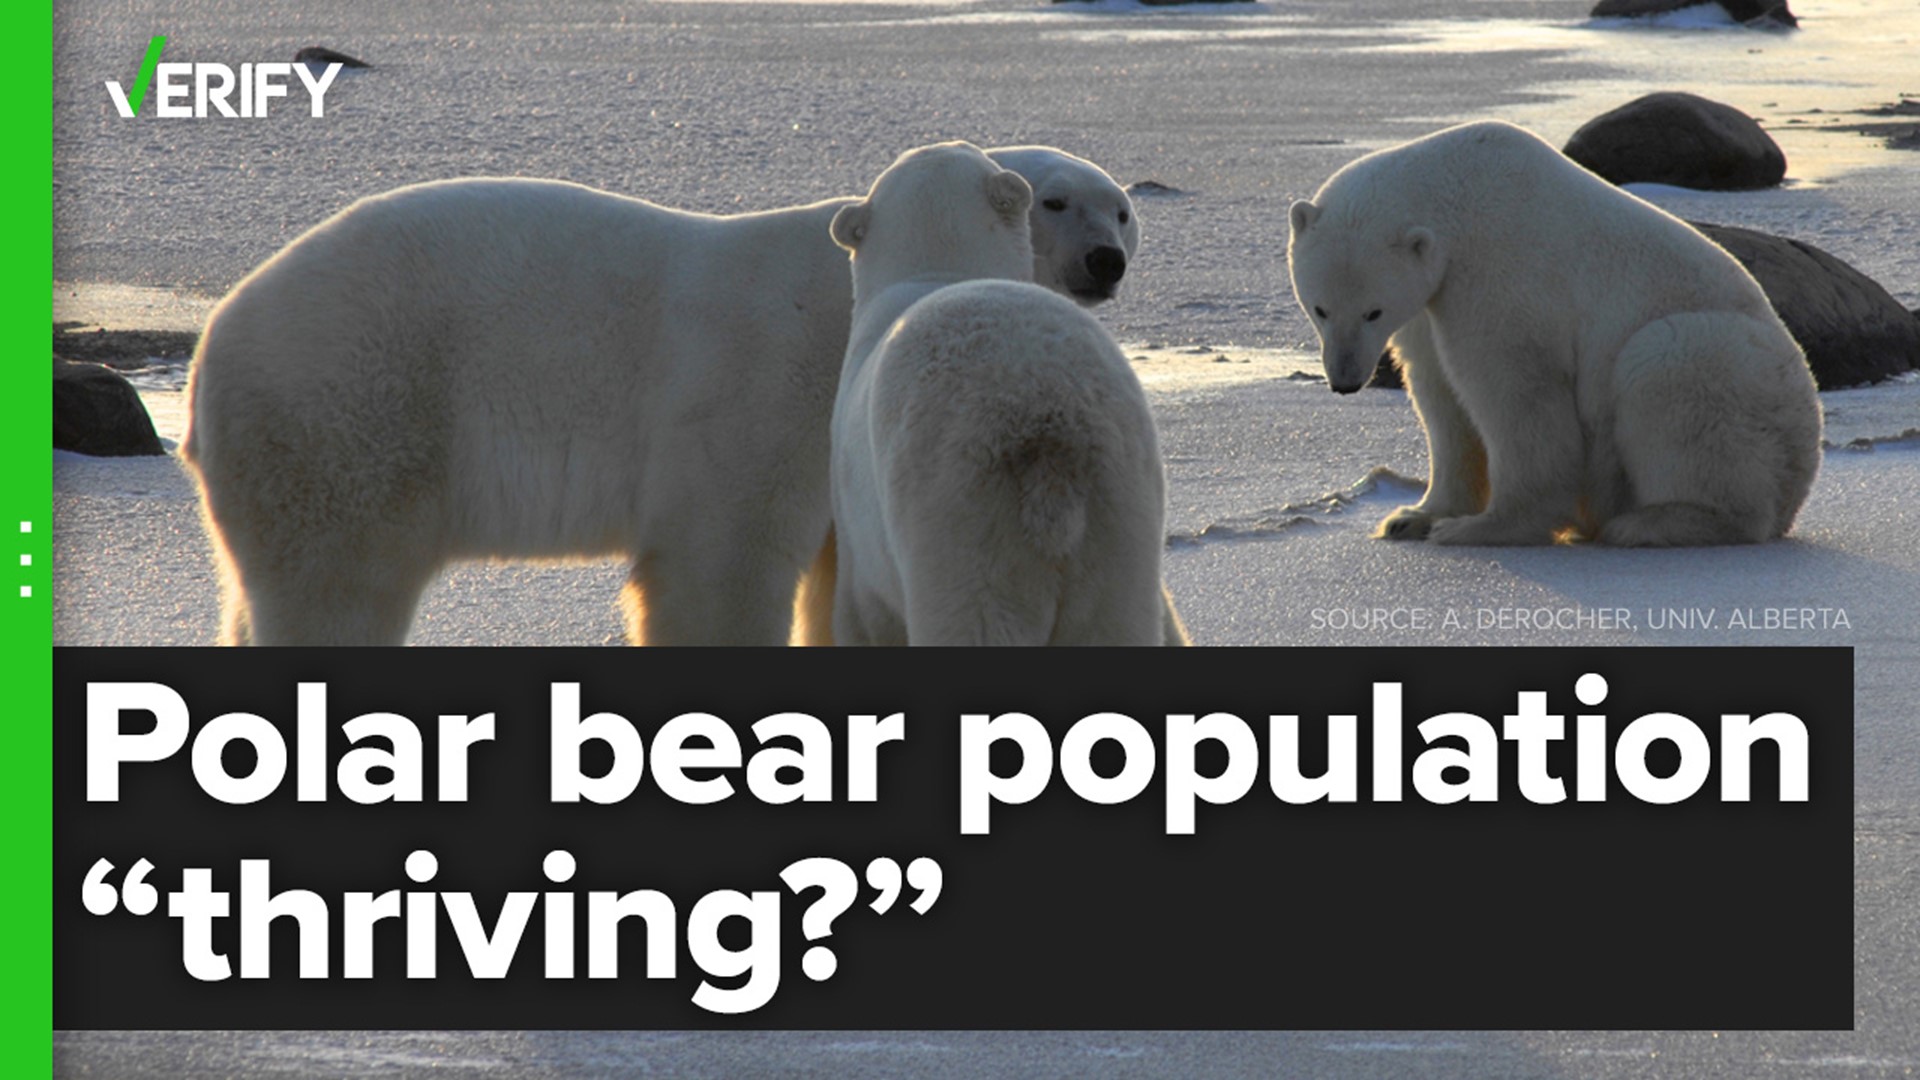 For more than a decade, people have falsely claimed polar bears are “thriving,” using an “increasing population” as proof. We explain the real status of polar bears.